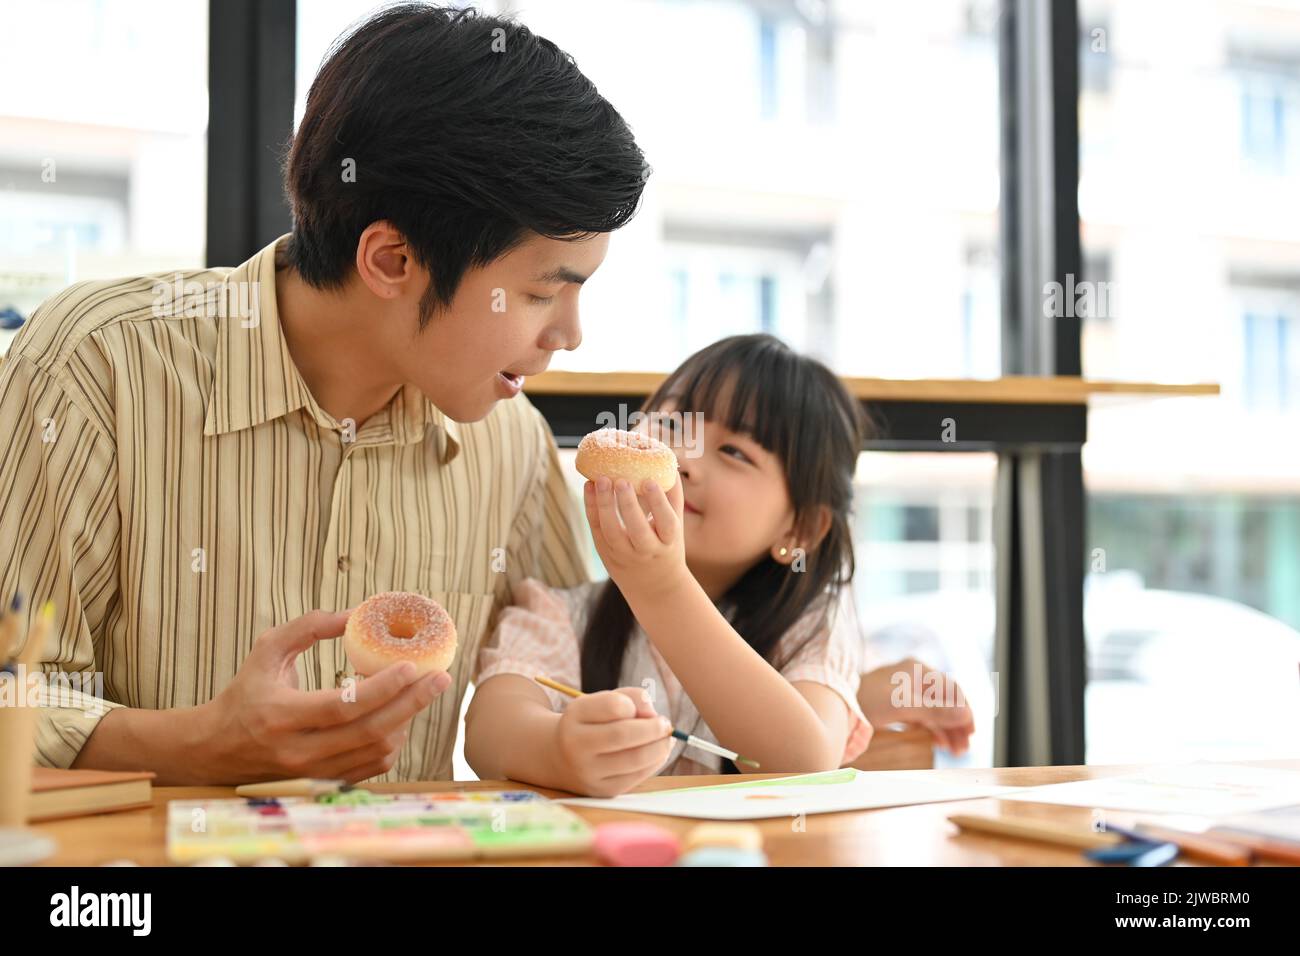 A kind and lovely young Asian girl shares a doughnut with her dad in the cafe. having a great time together, enjoying activity, happy family moment. Stock Photo